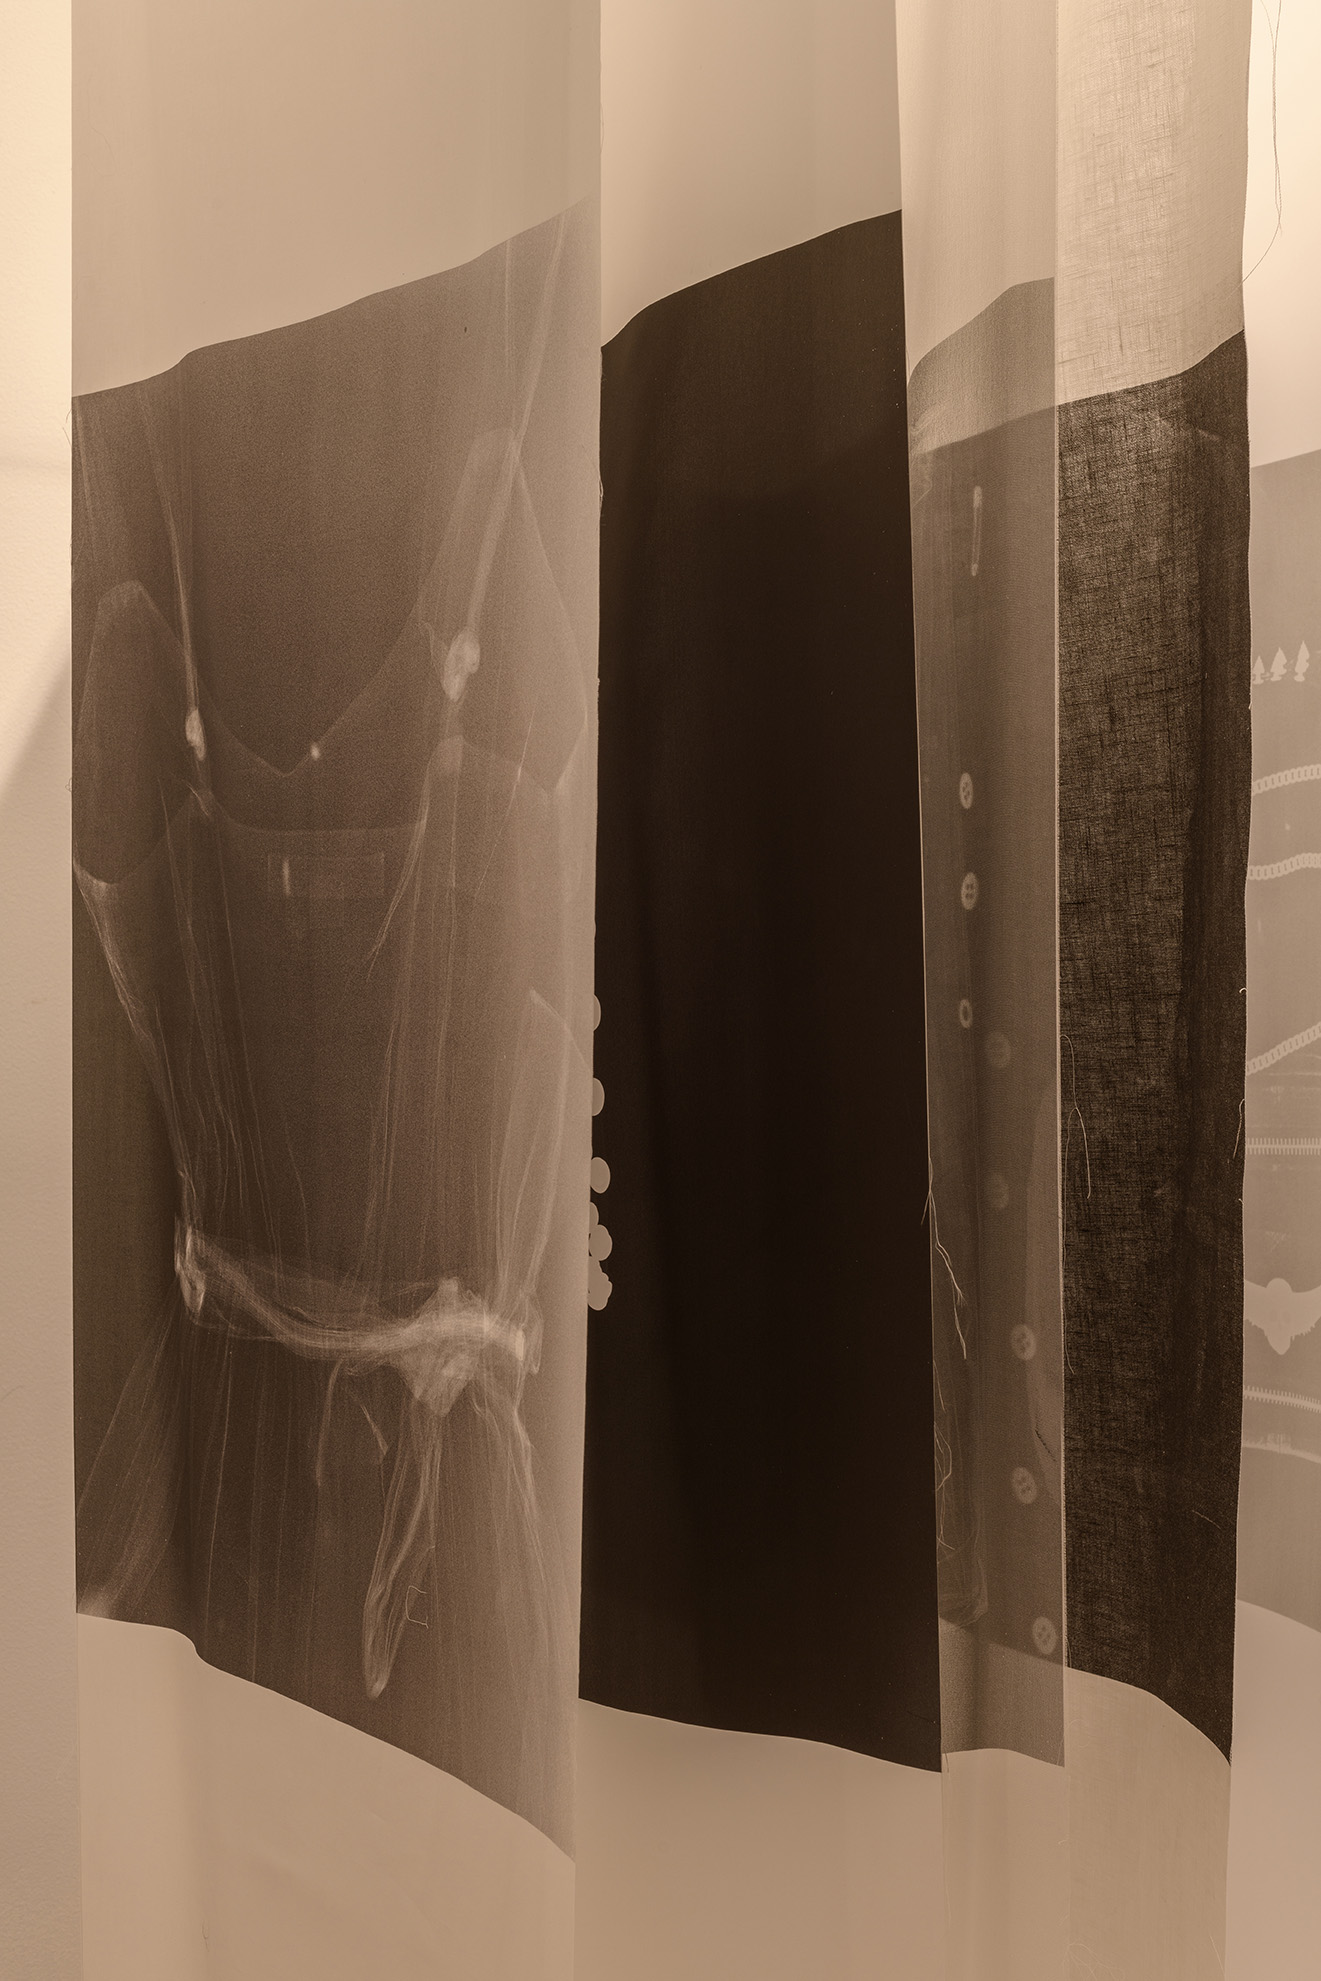 [The x-ray prints are visible through the silk backing material, and it is apparent that the stack is arranged face-to-face, back-to-back. The faint outline of a dress with a ribbon faces a collection of stark white dots belonging to a garment it is difficult to identify by x-ray alone.]